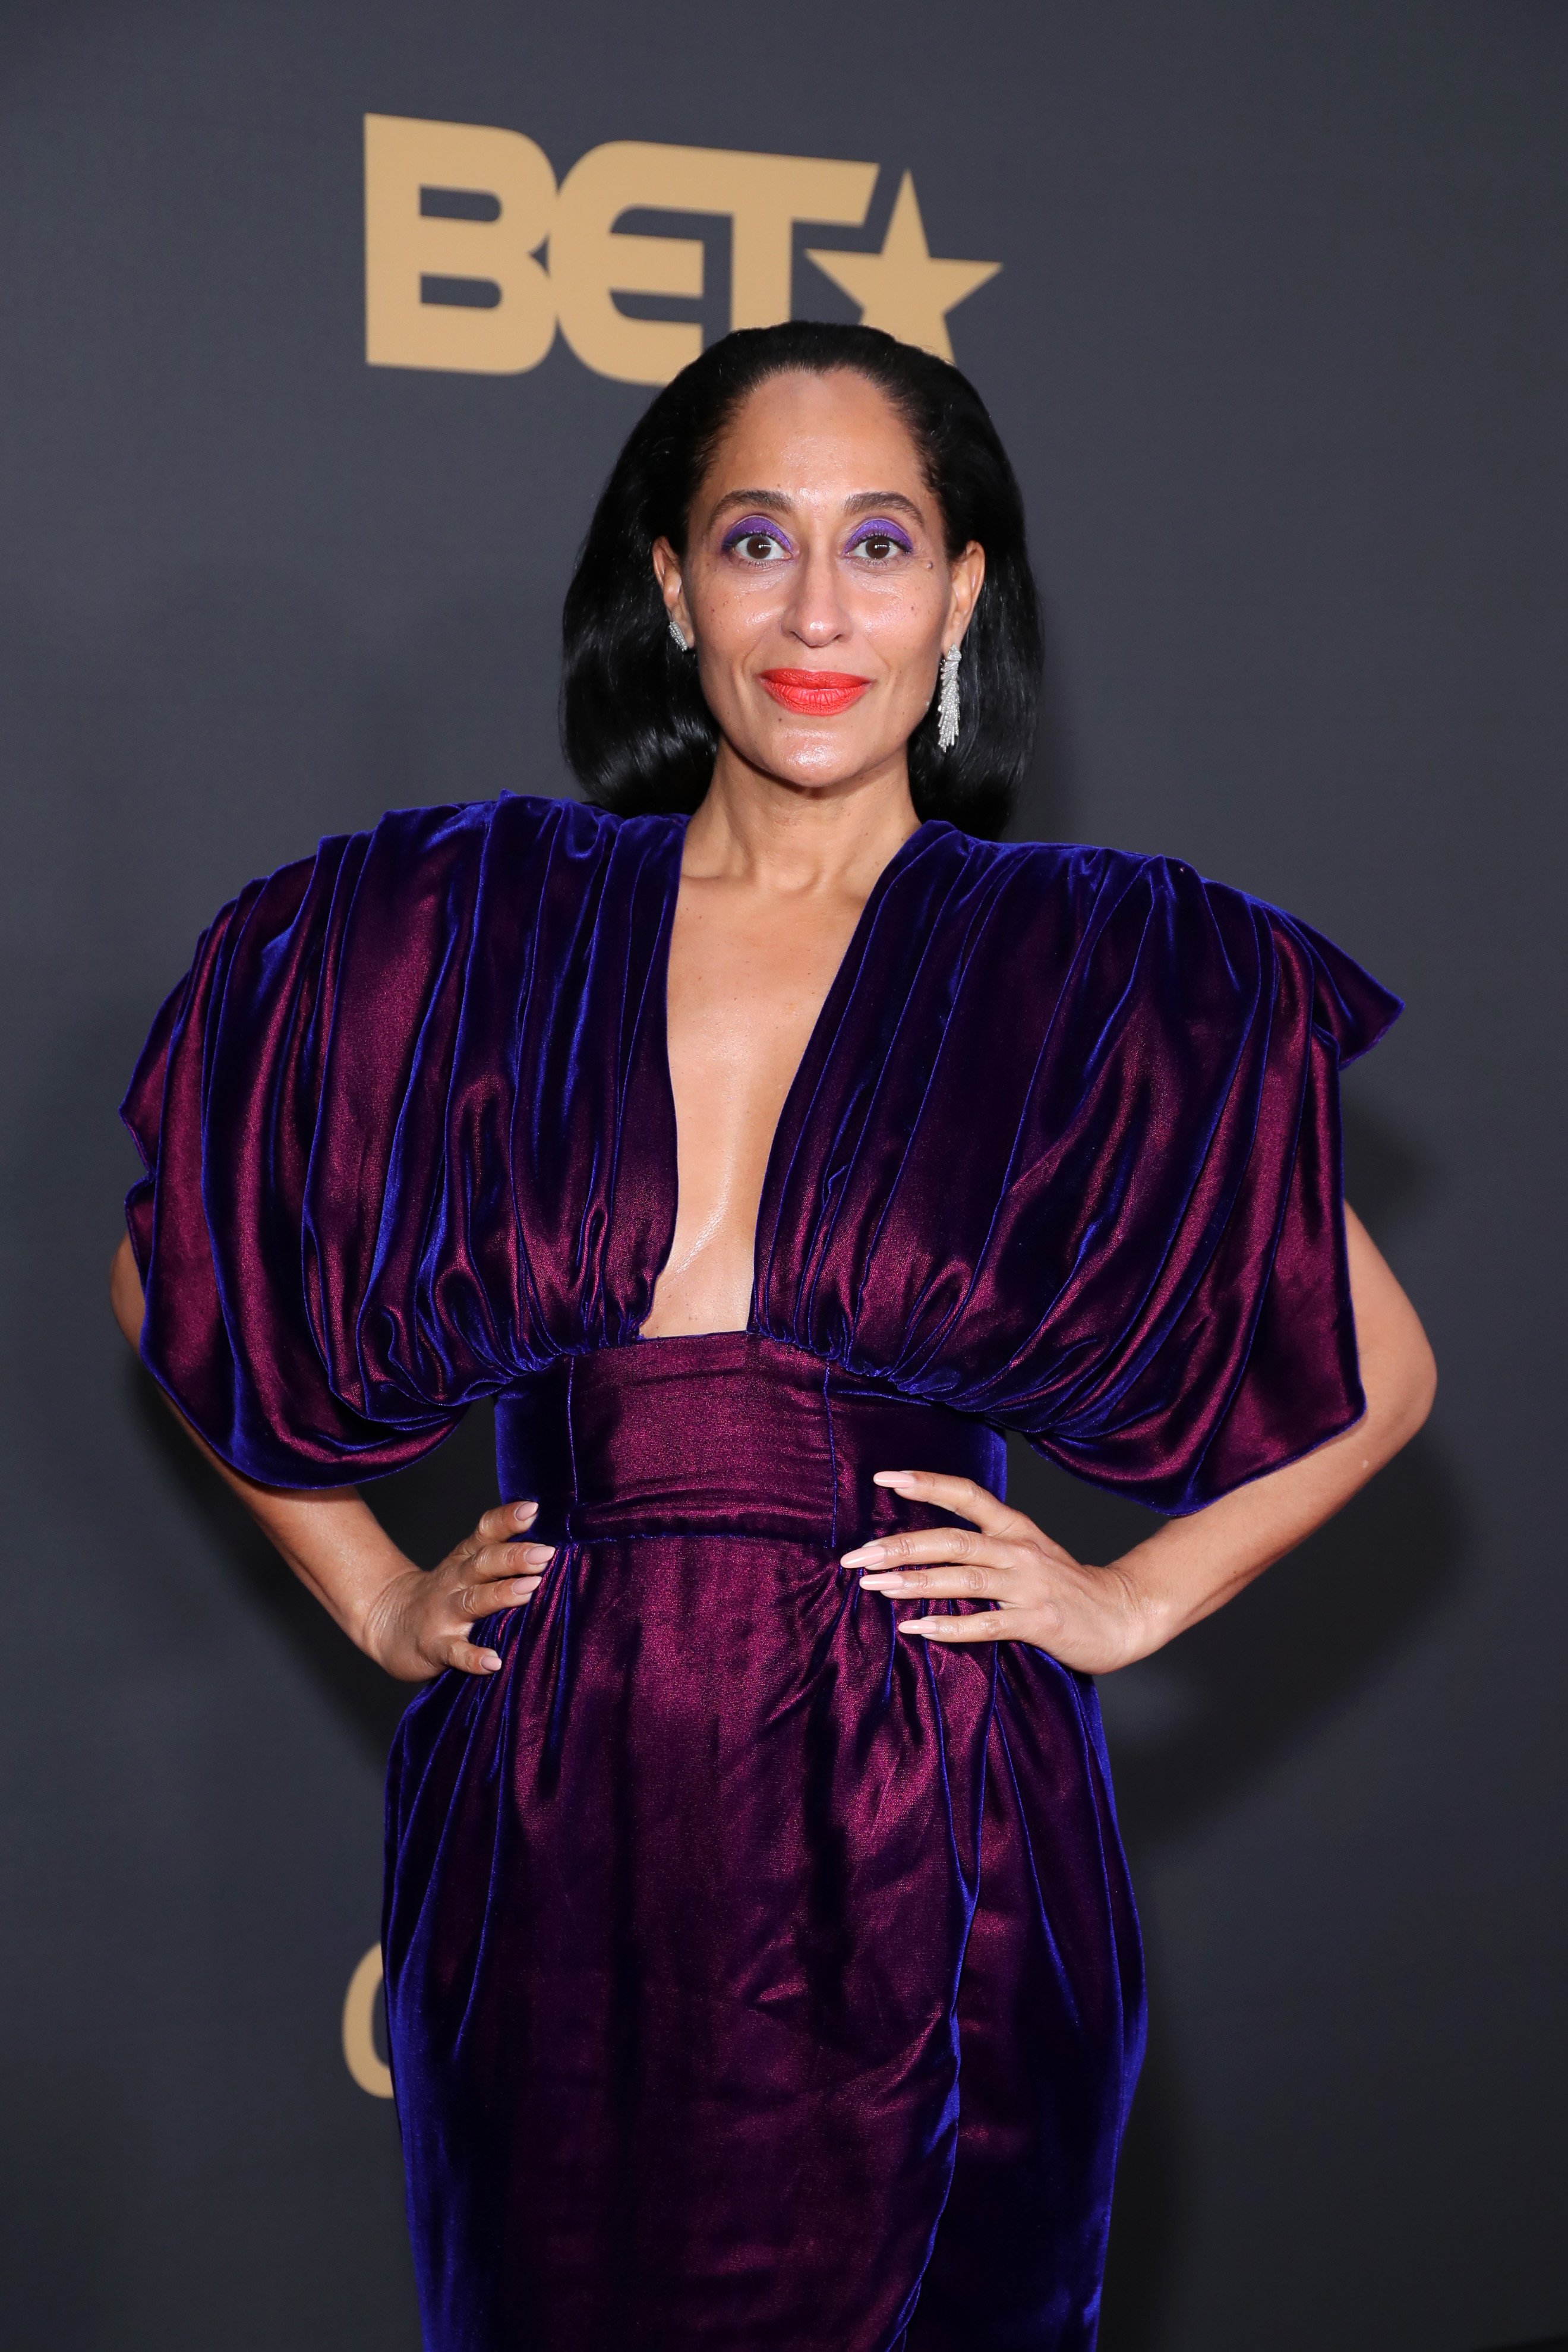 Tracee Ellis Ross at the 51st NAACP Image Awards presented by BET on February 22, 2020. | Photo: Getty Images